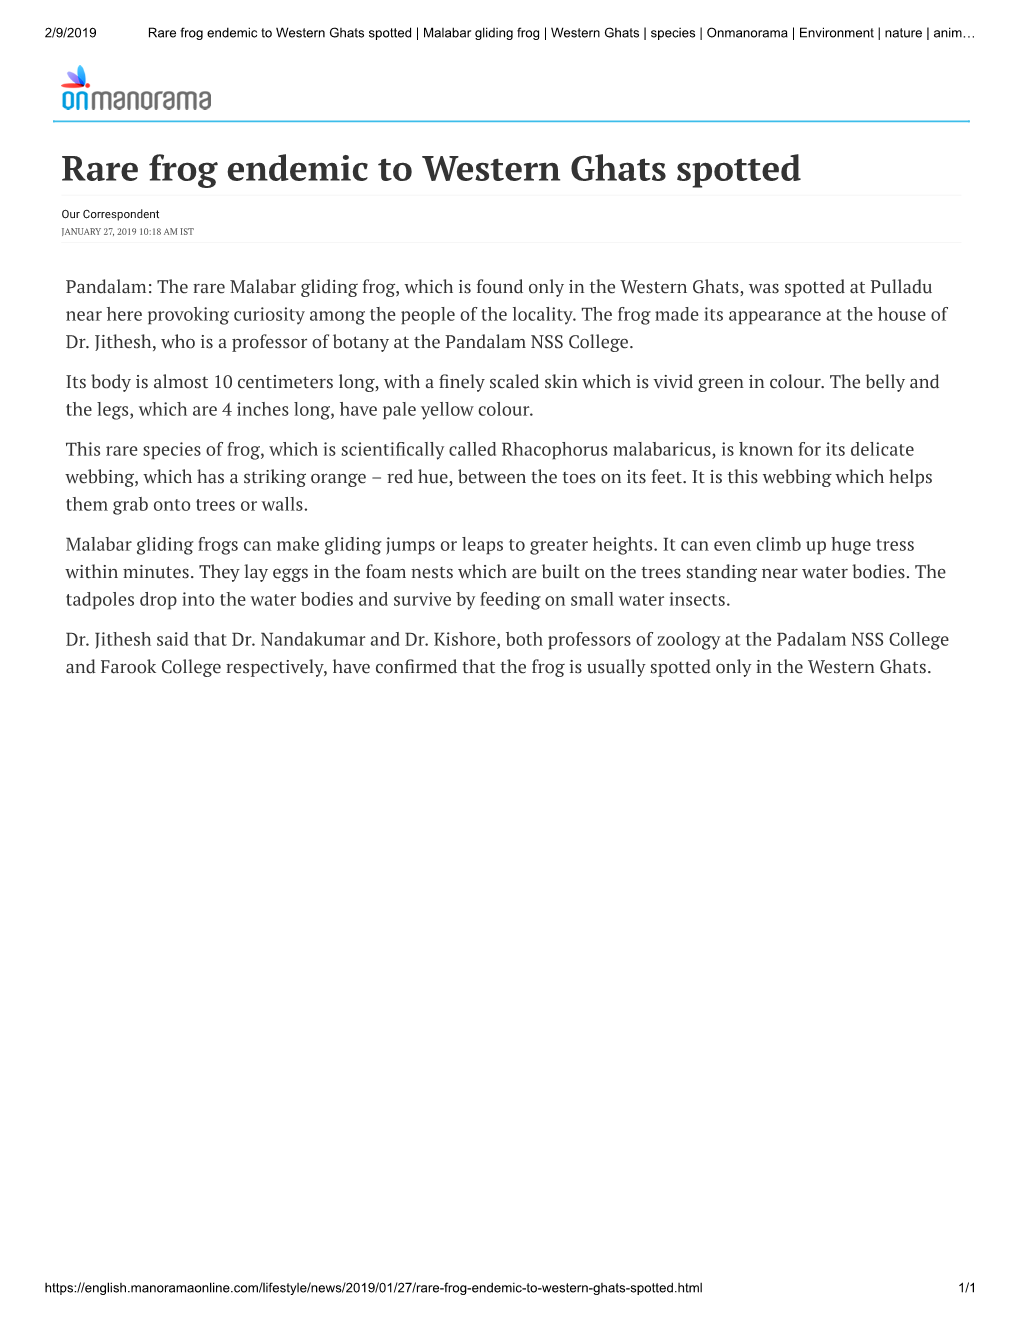 Rare Frog Endemic to Western Ghats Spotted | Malabar Gliding Frog | Western Ghats | Species | Onmanorama | Environment | Nature | Anim…